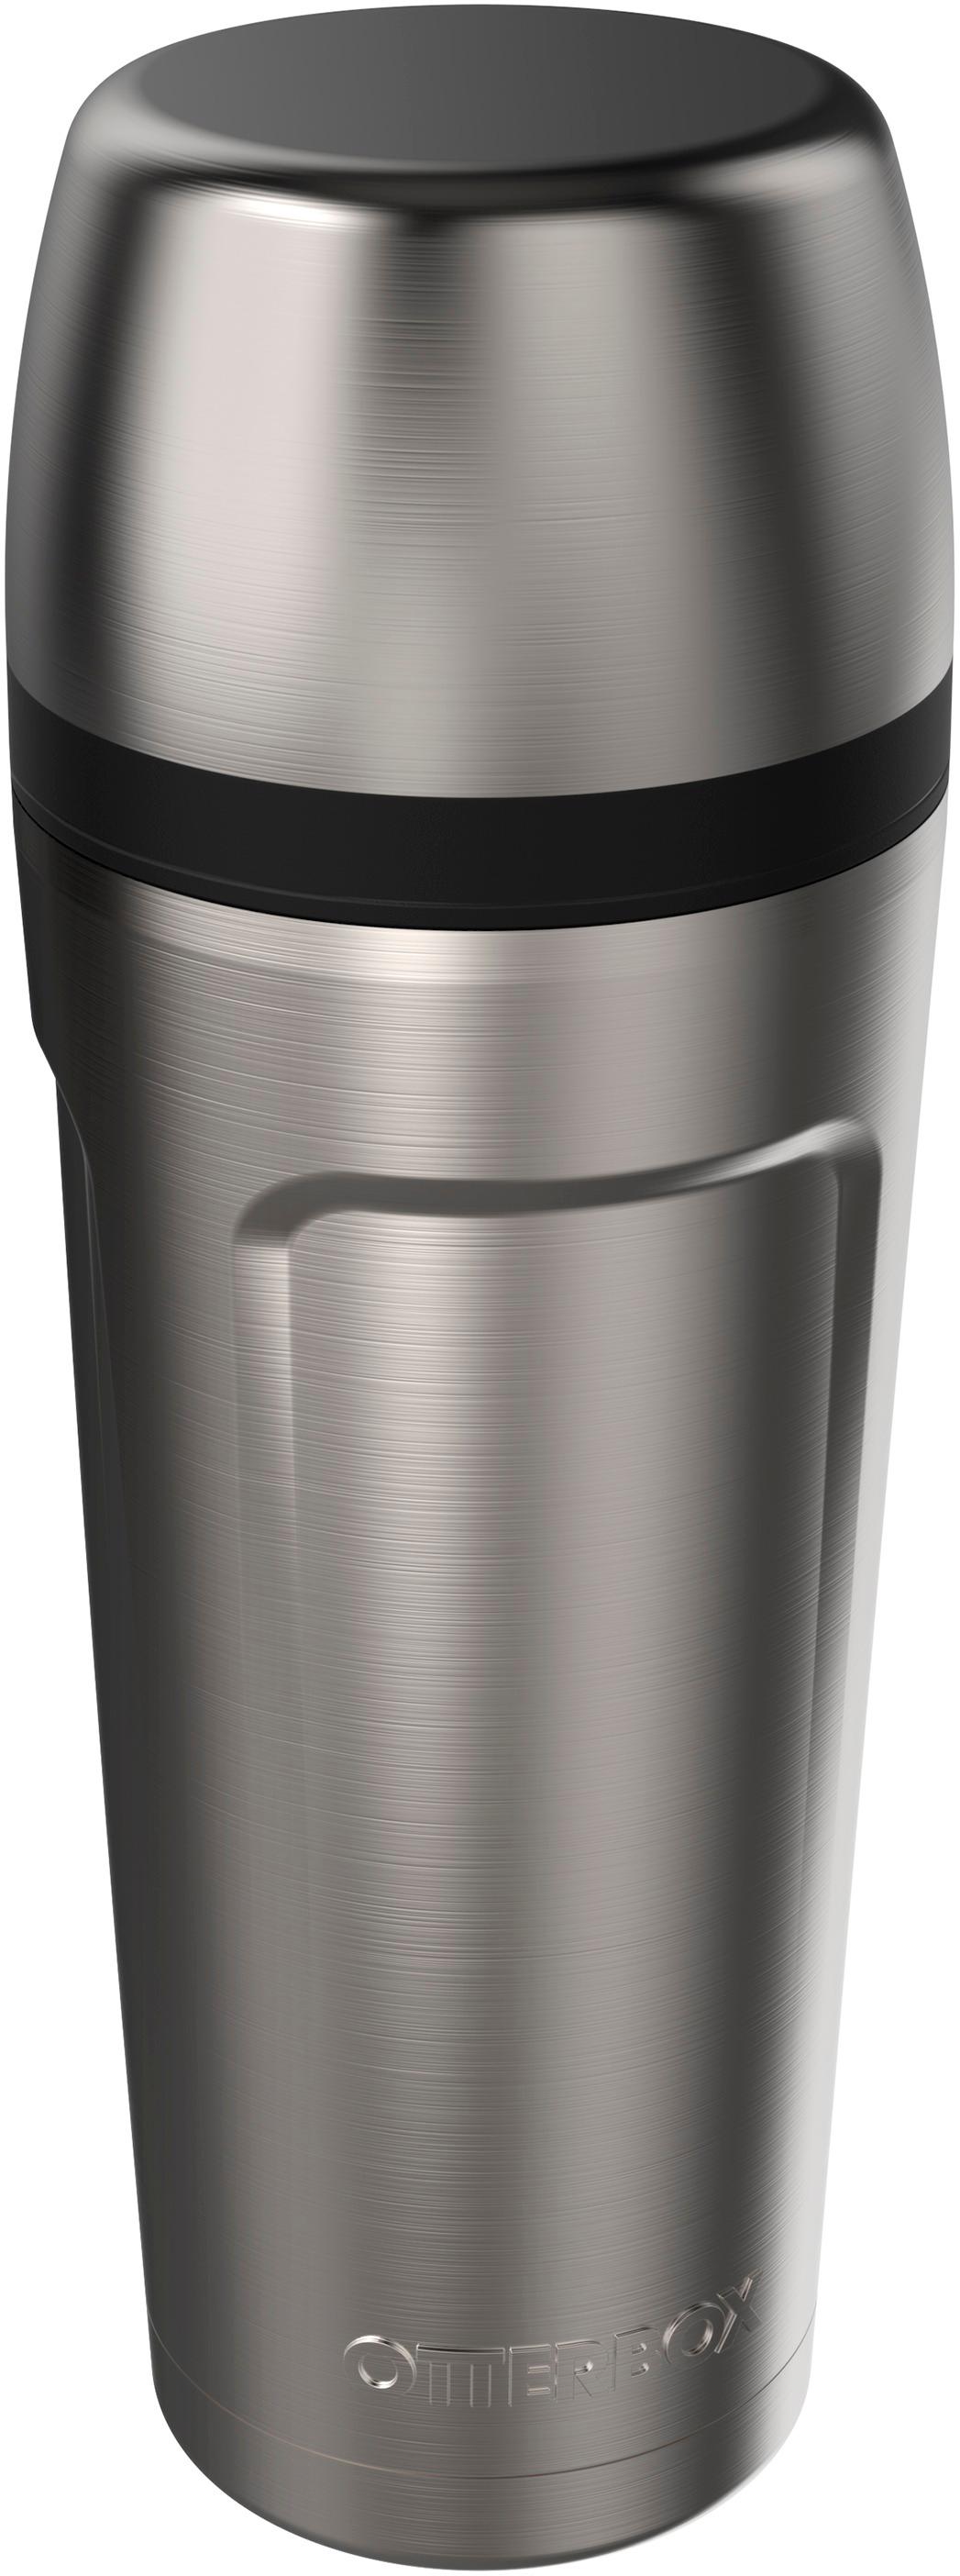 Keurig Insulated Travel Mug Fits K-Cup Pod Coffee Maker, 12 oz, Stainless  Steel